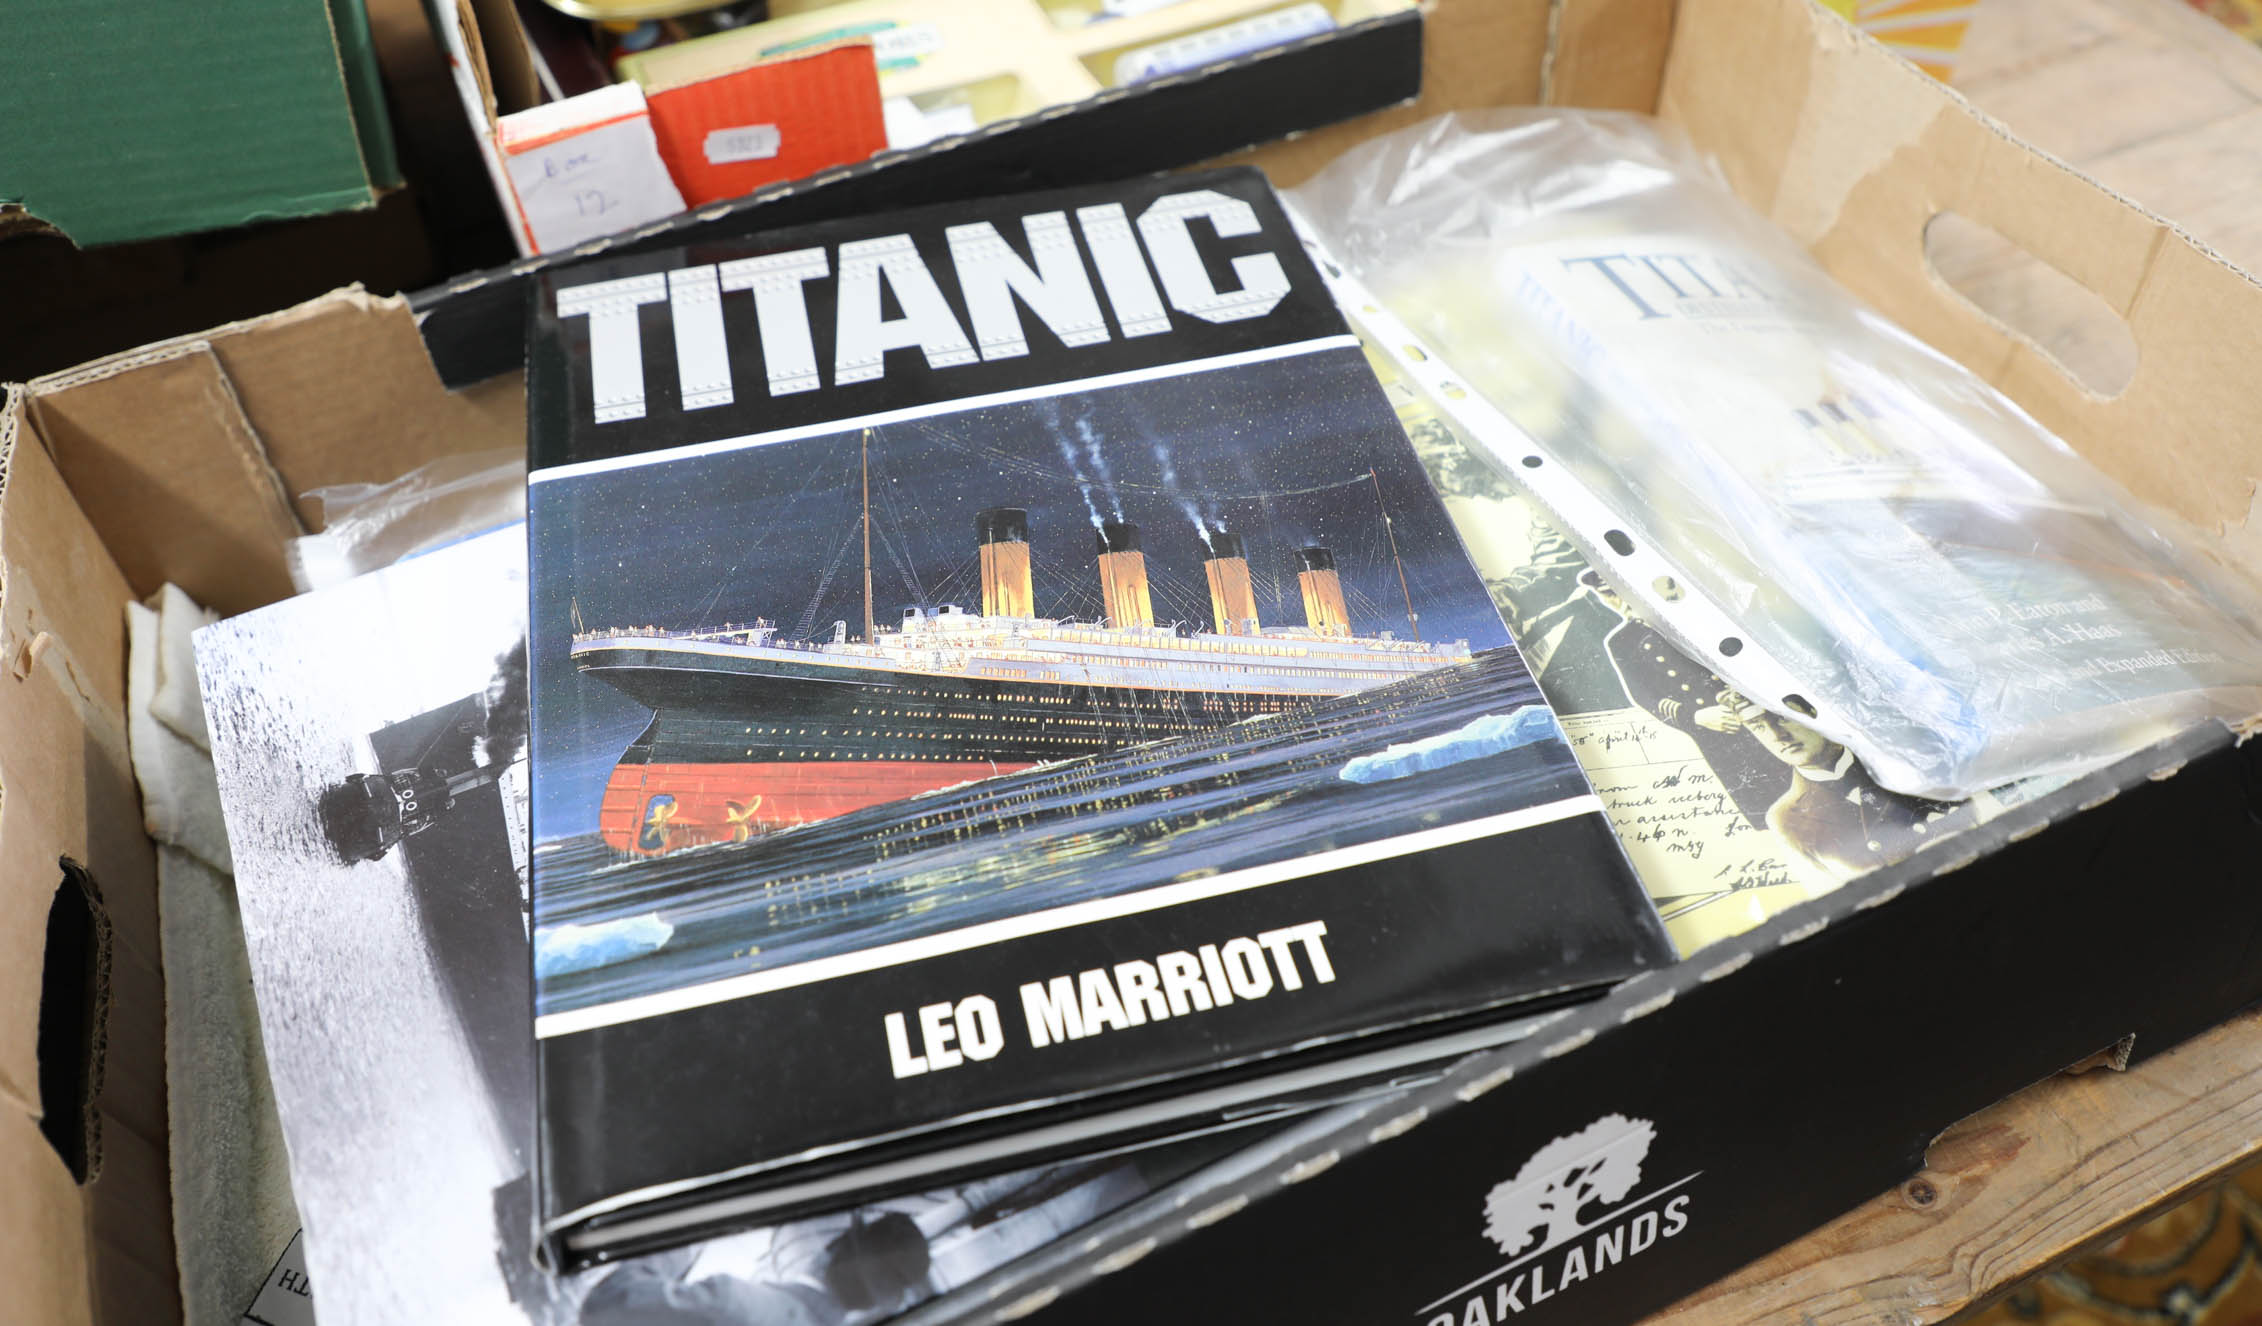 Collection of ten book about the R.M.S. Titanic.